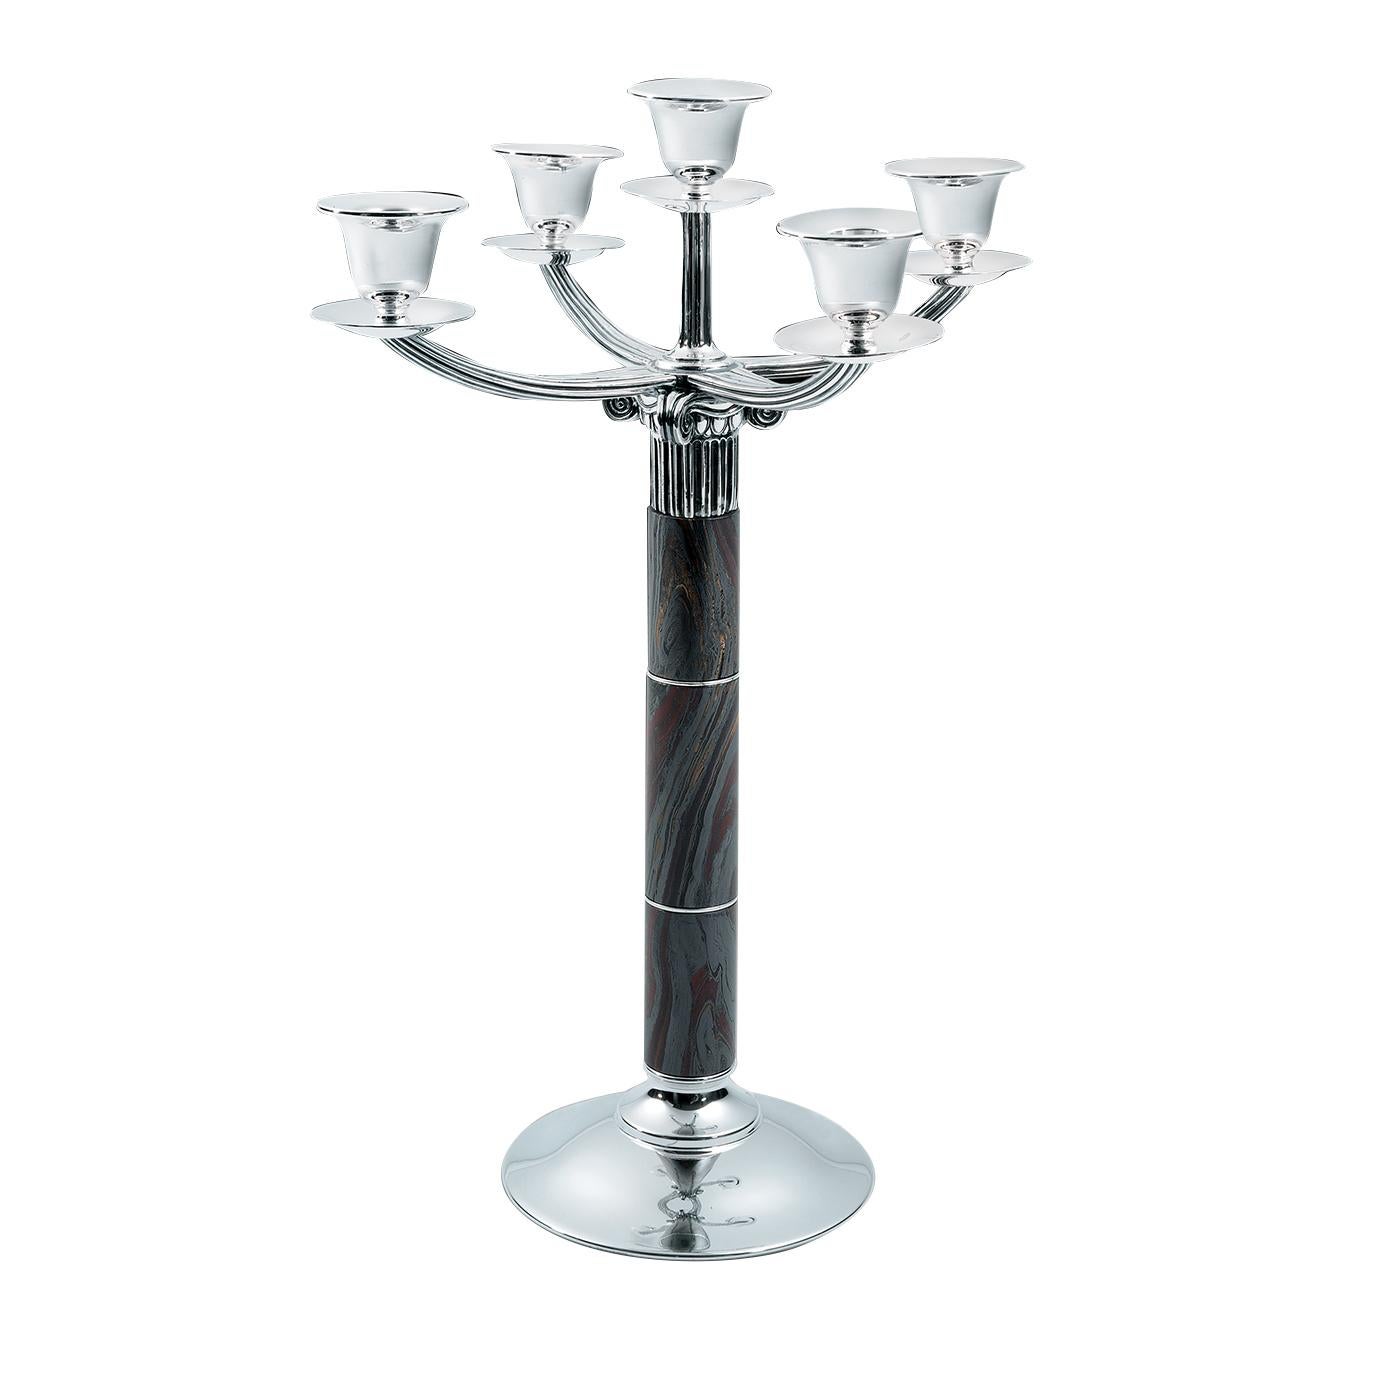 Harmoniously merging classical elements of the Greek architecture and fluid, contemporary shapes, the Kallicrate collection is characterized by pieces that are sophisticated yet versatile. This striking candelabrum is supported by a round base with